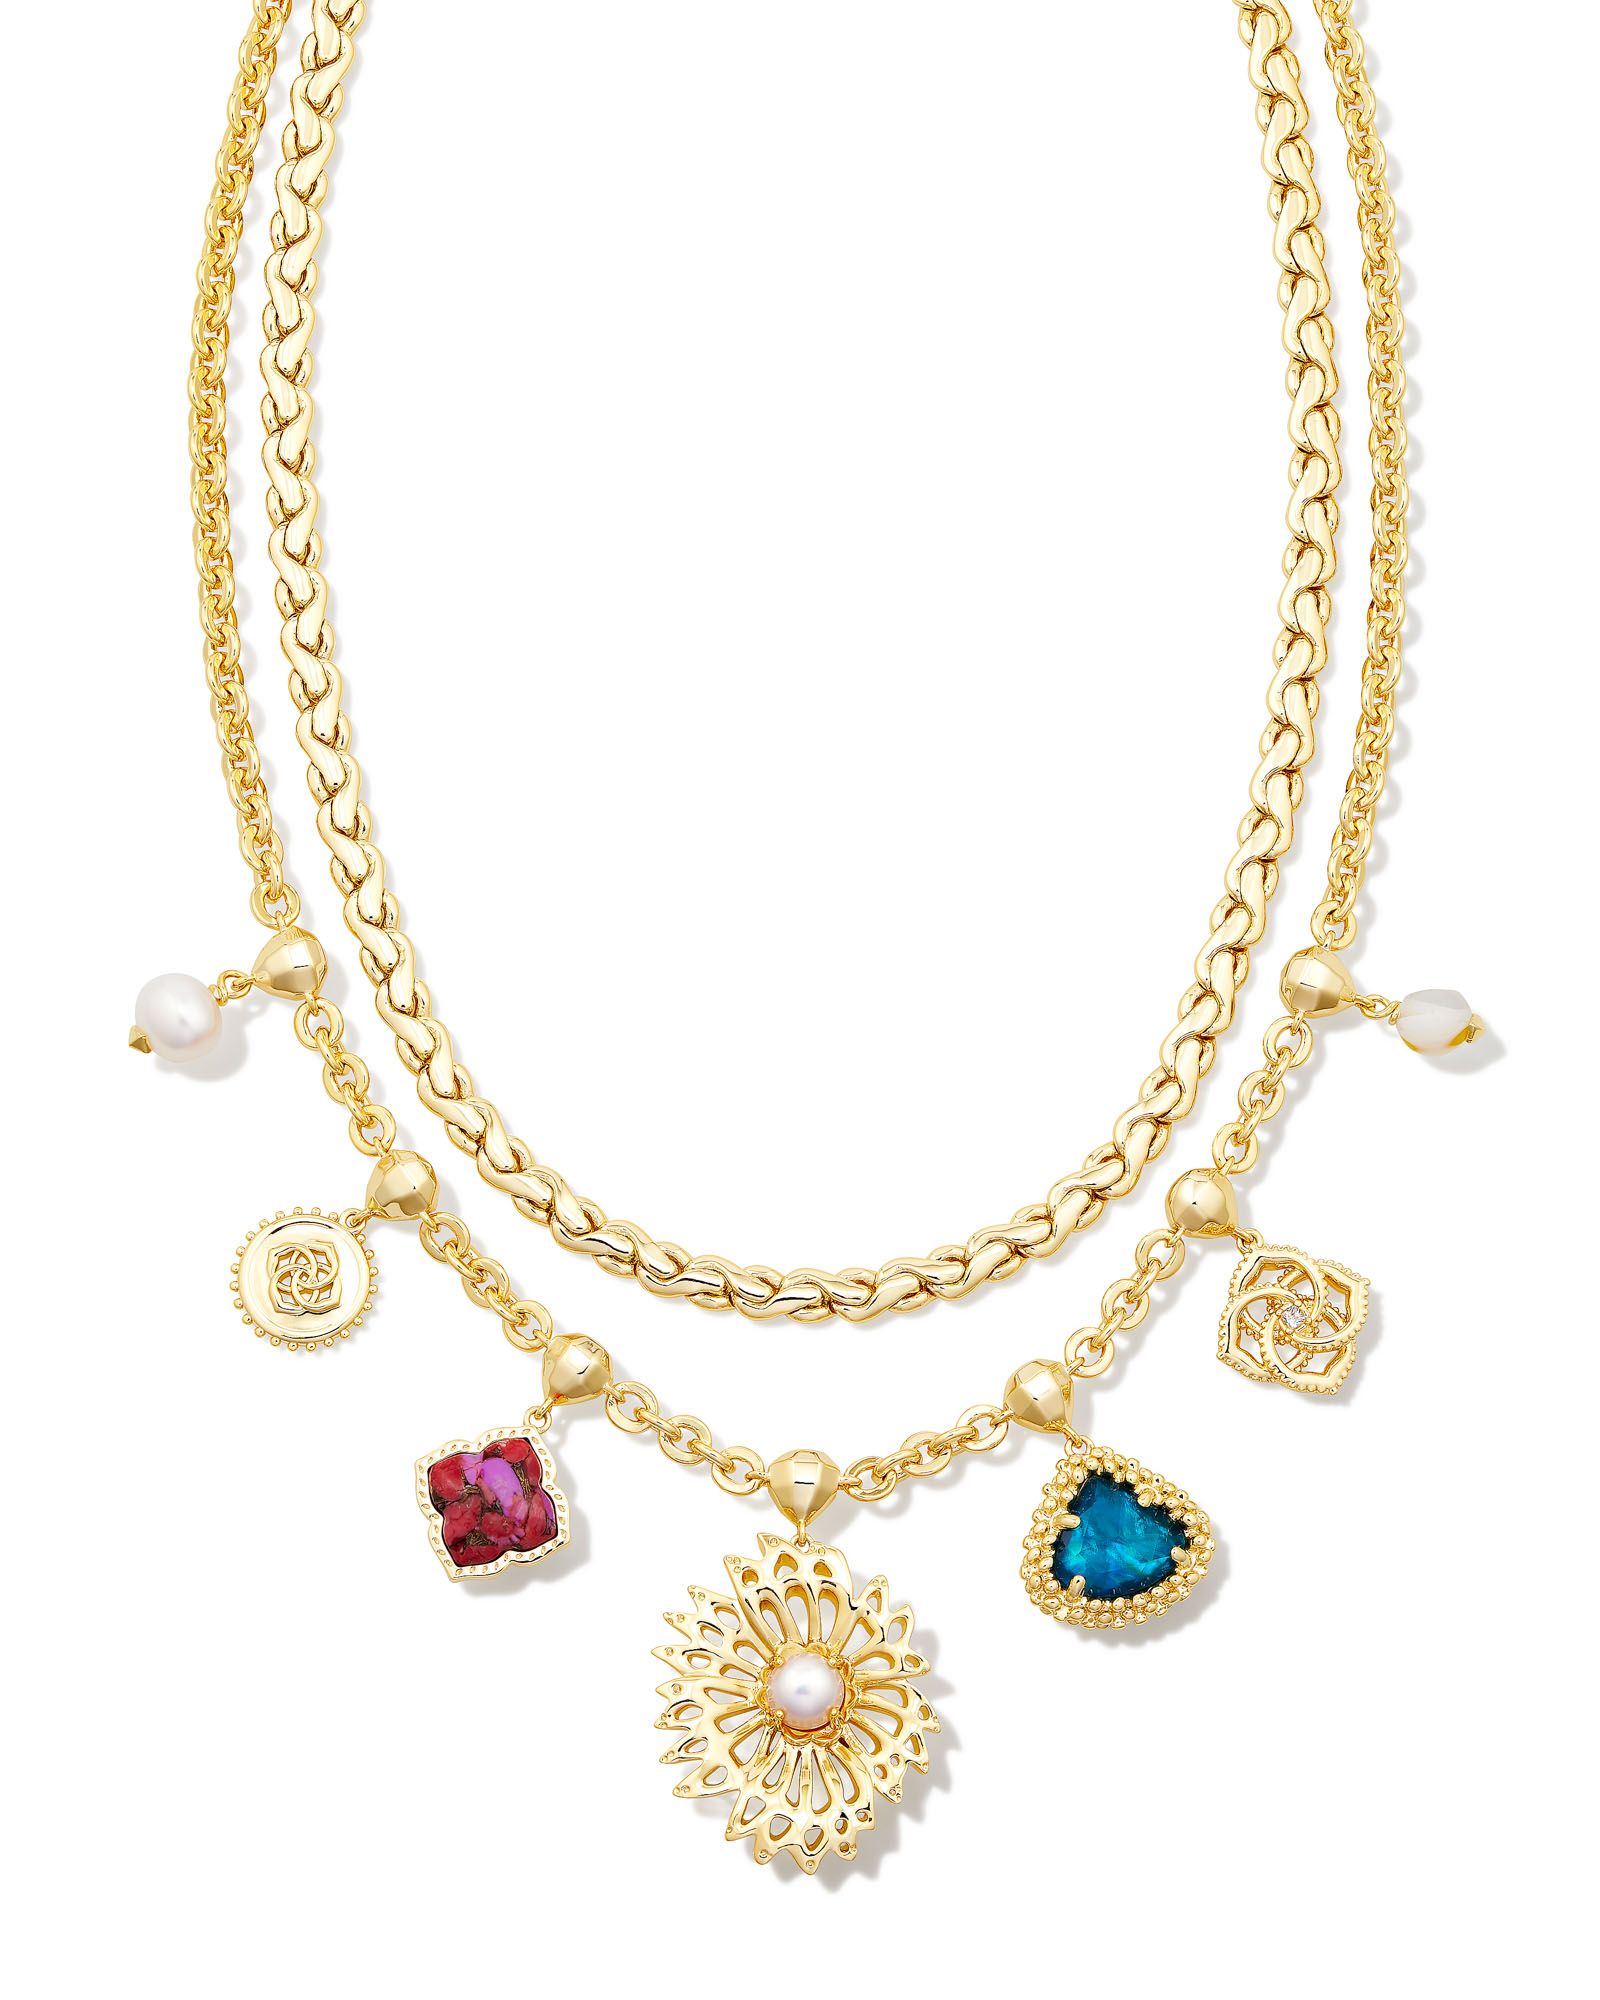 Brielle Convertible Gold Charm Necklace in Multi Mix | Kendra Scott